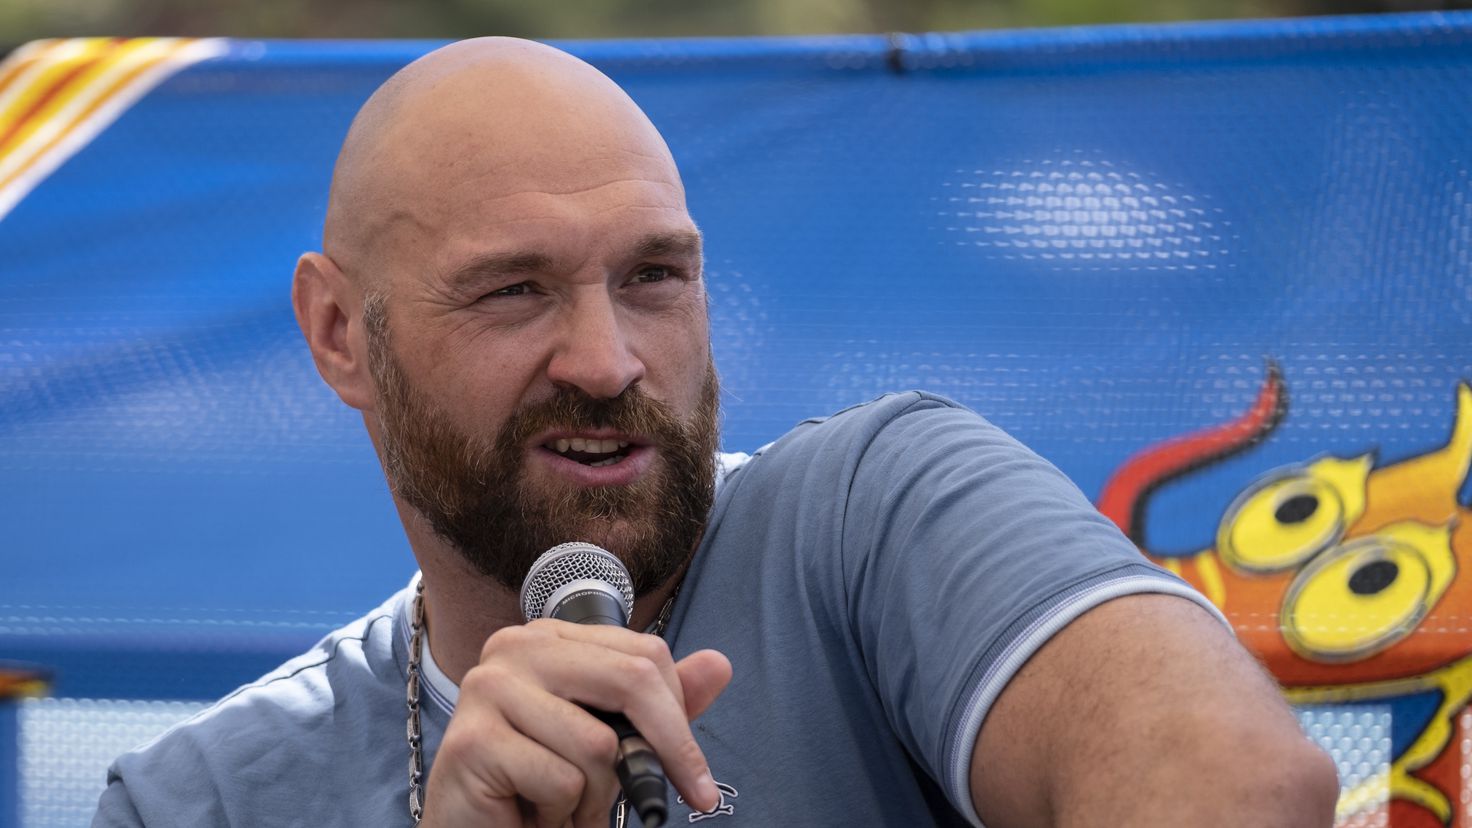 Tyson Fury says Andy Ruiz asked for $20 million to fight him
